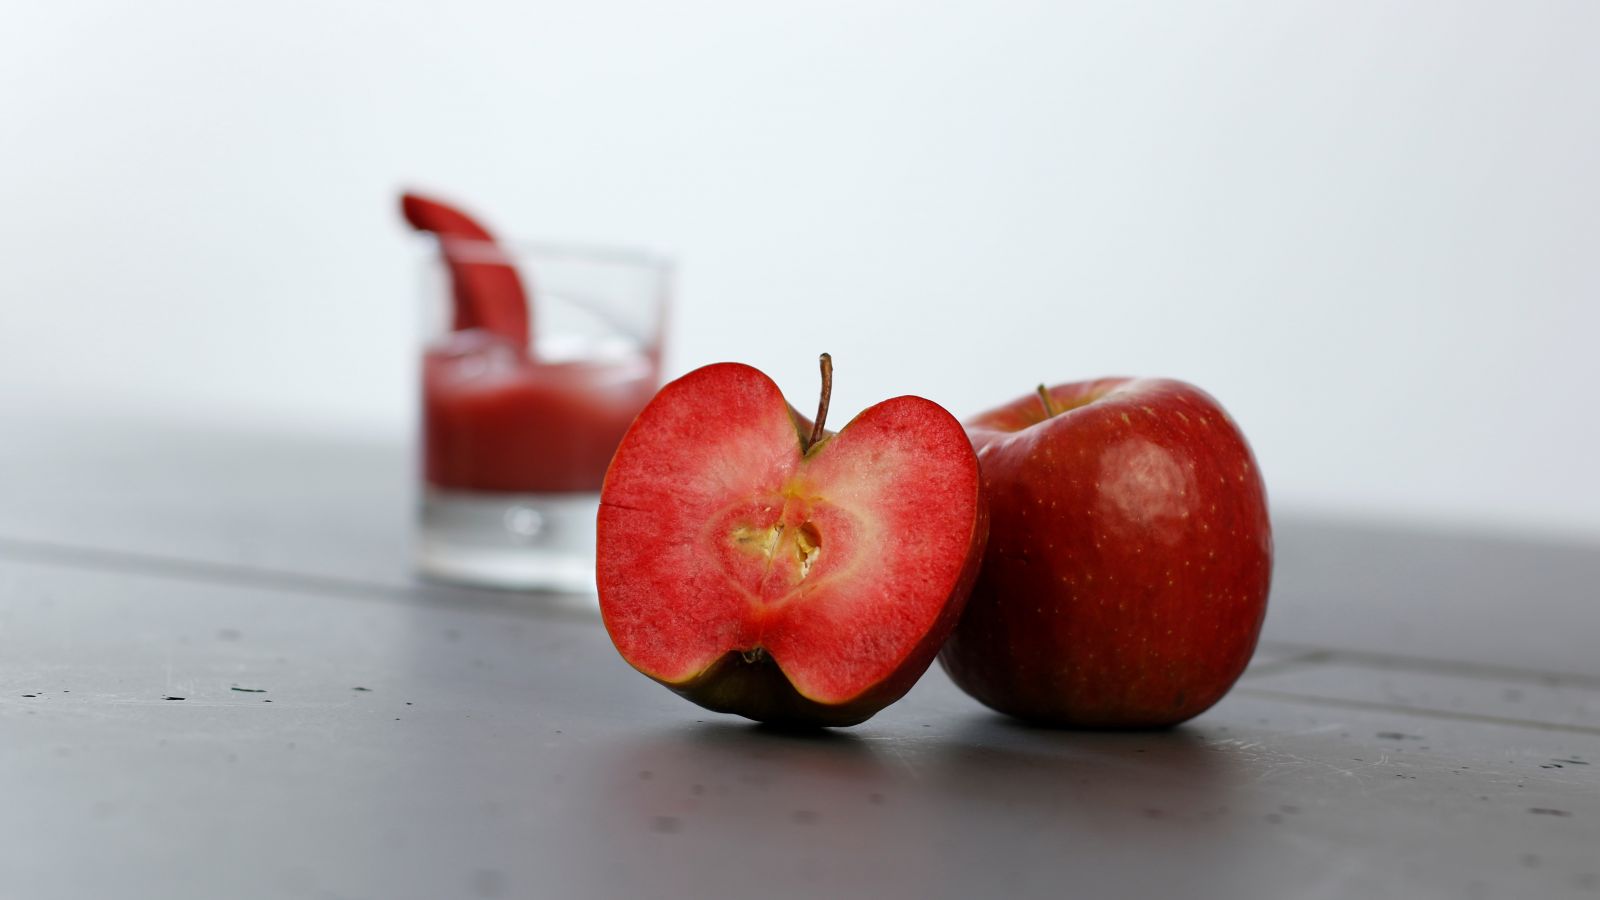 Red Moon apples